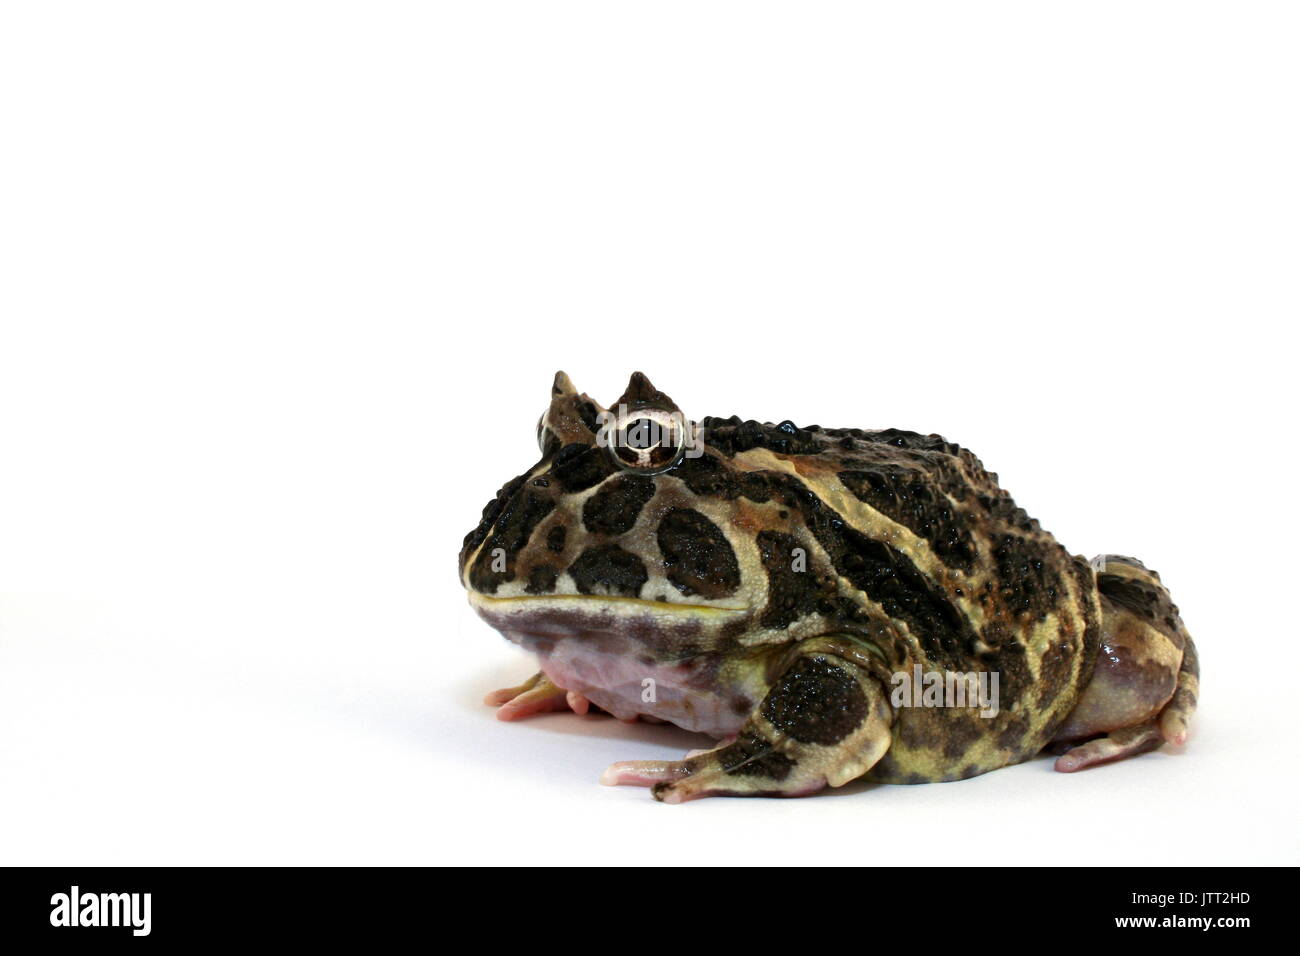 Cranwell's Horned Frog, Ceratophrys cranwelli, Adult Male Argentinian Pacman Frog on White Background, Captive Stock Photo